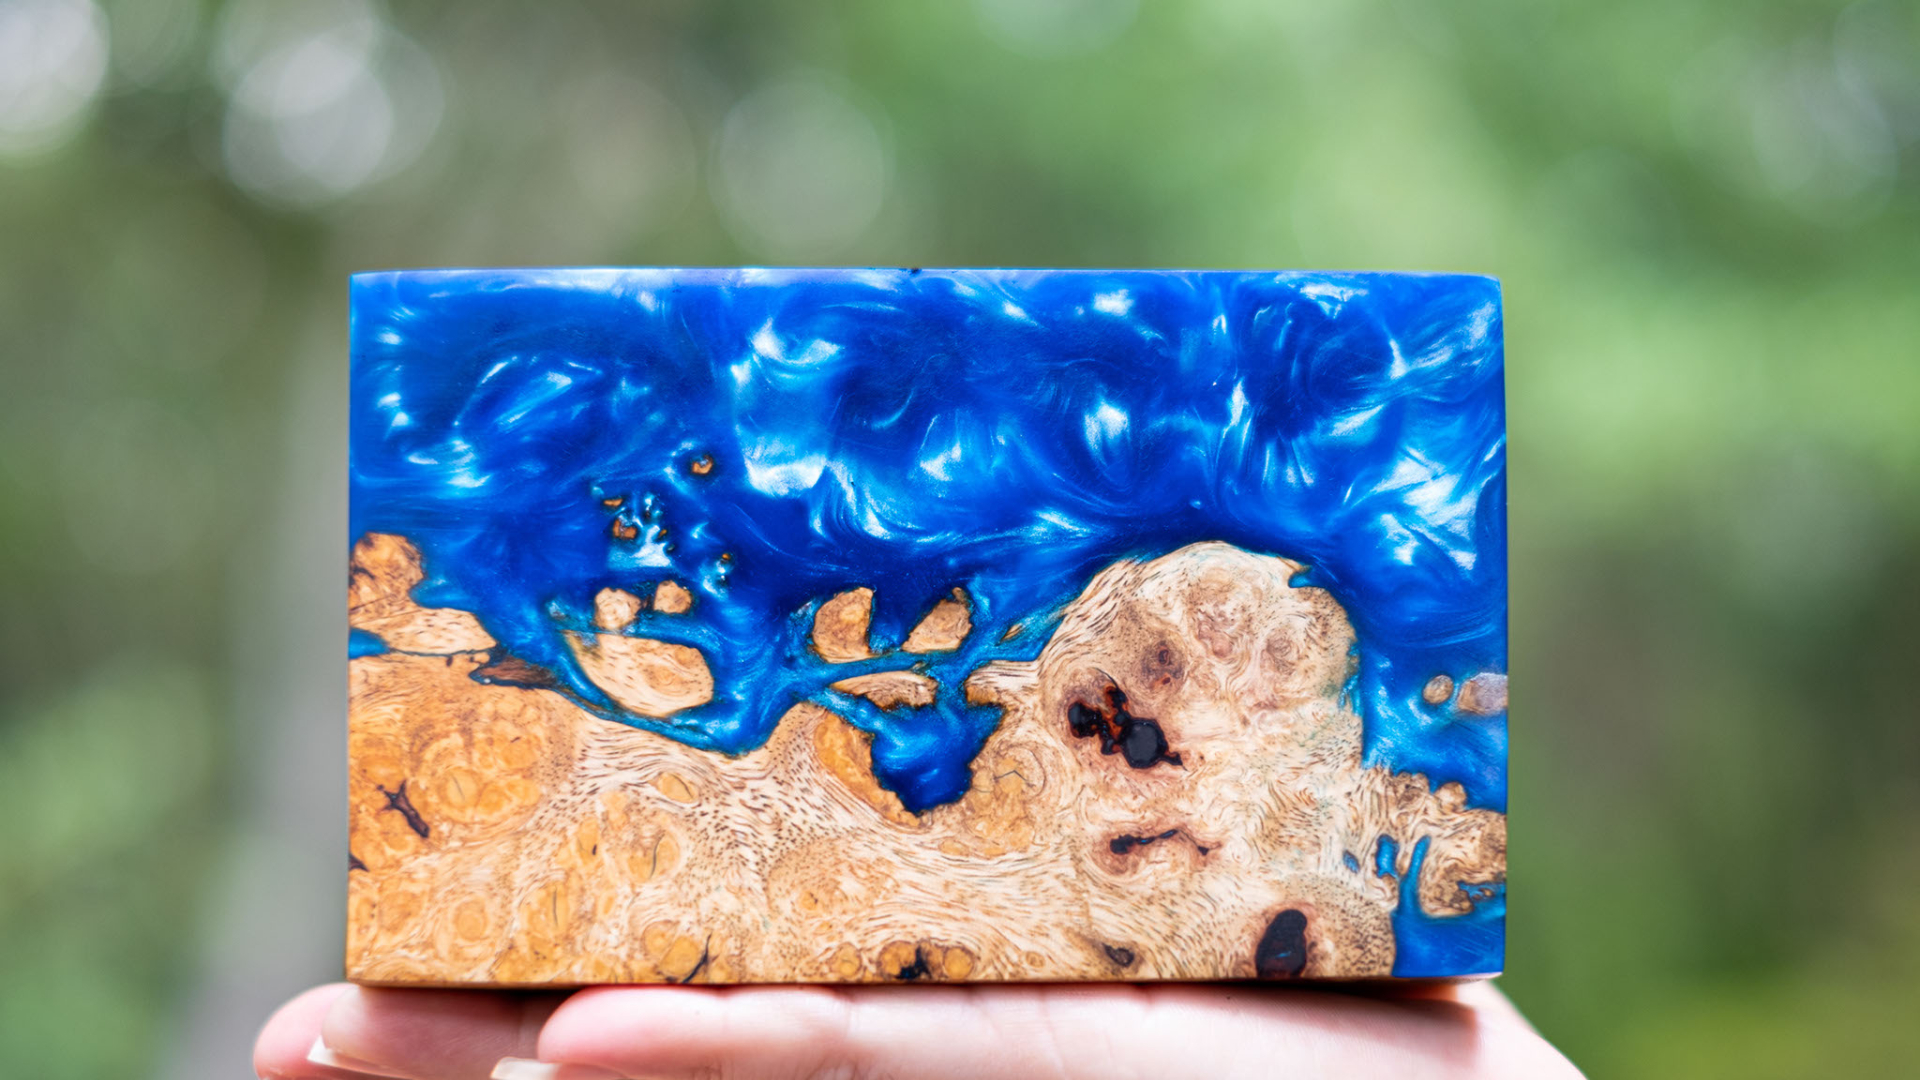 Wood and resin block with blue iridescent color